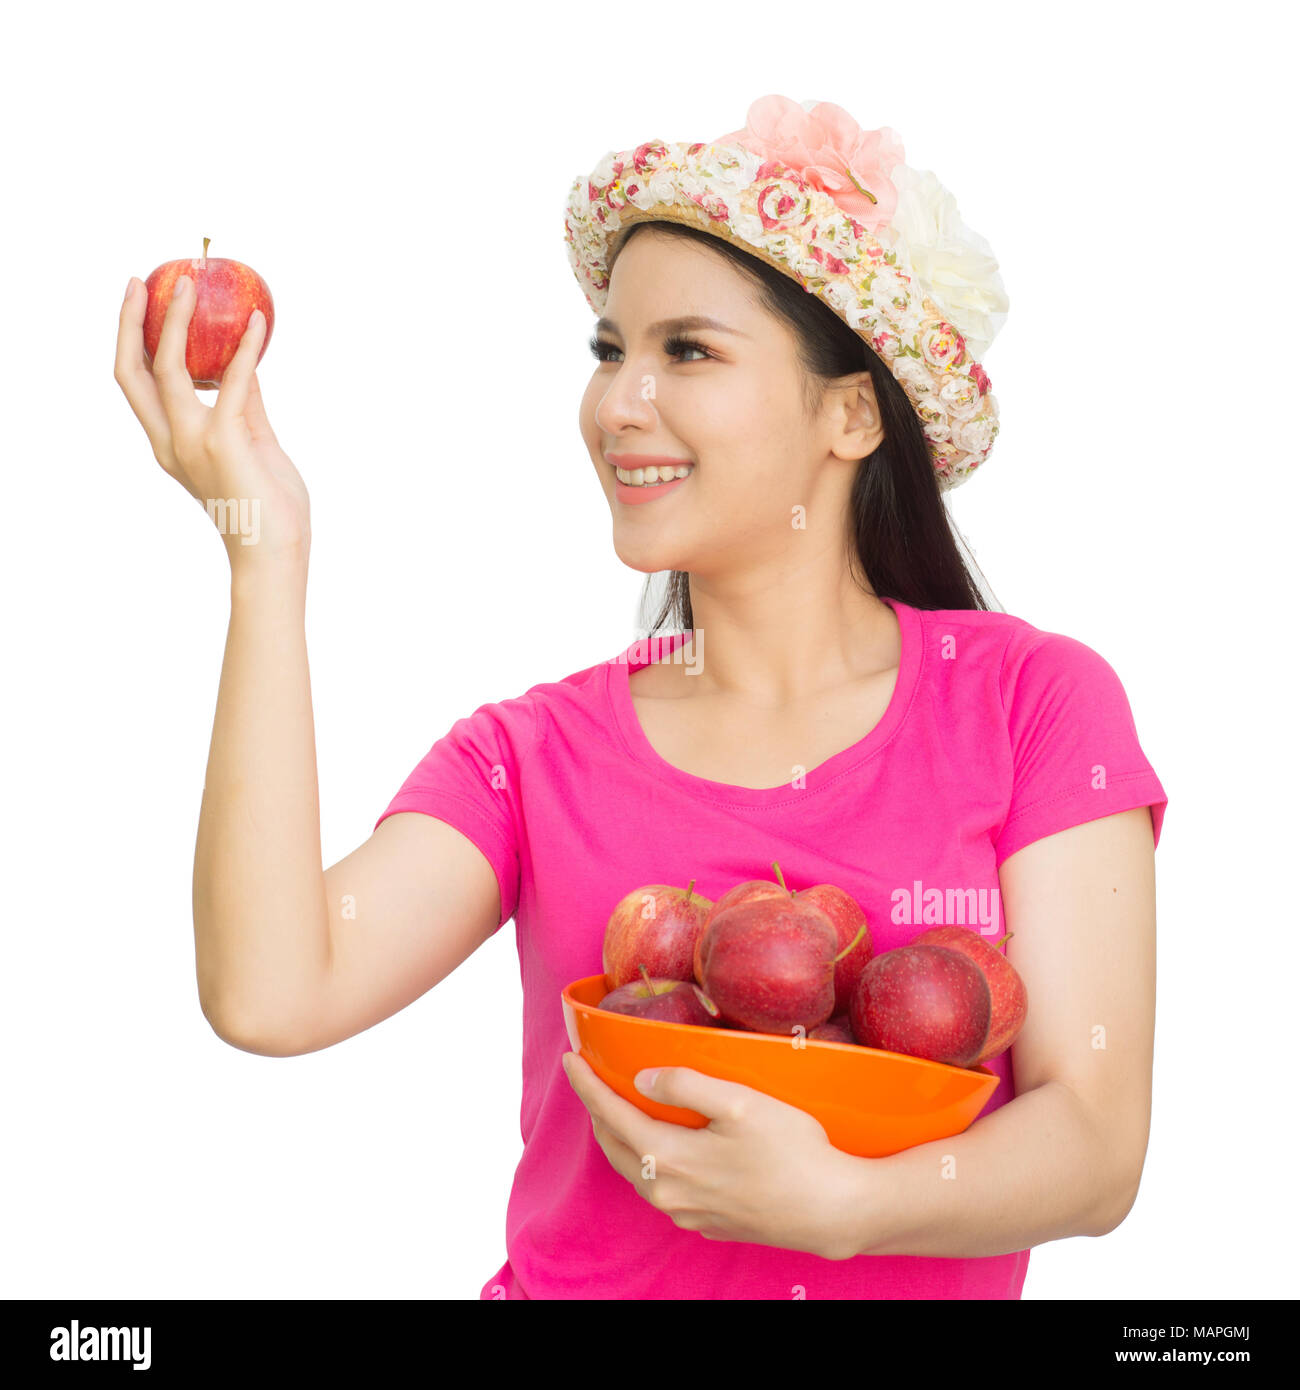 Portrait of lovely young woman holding a fresh ripe apple in bowl and smiling isolated on white background with clipping path. Healthy eating concep. Stock Photo